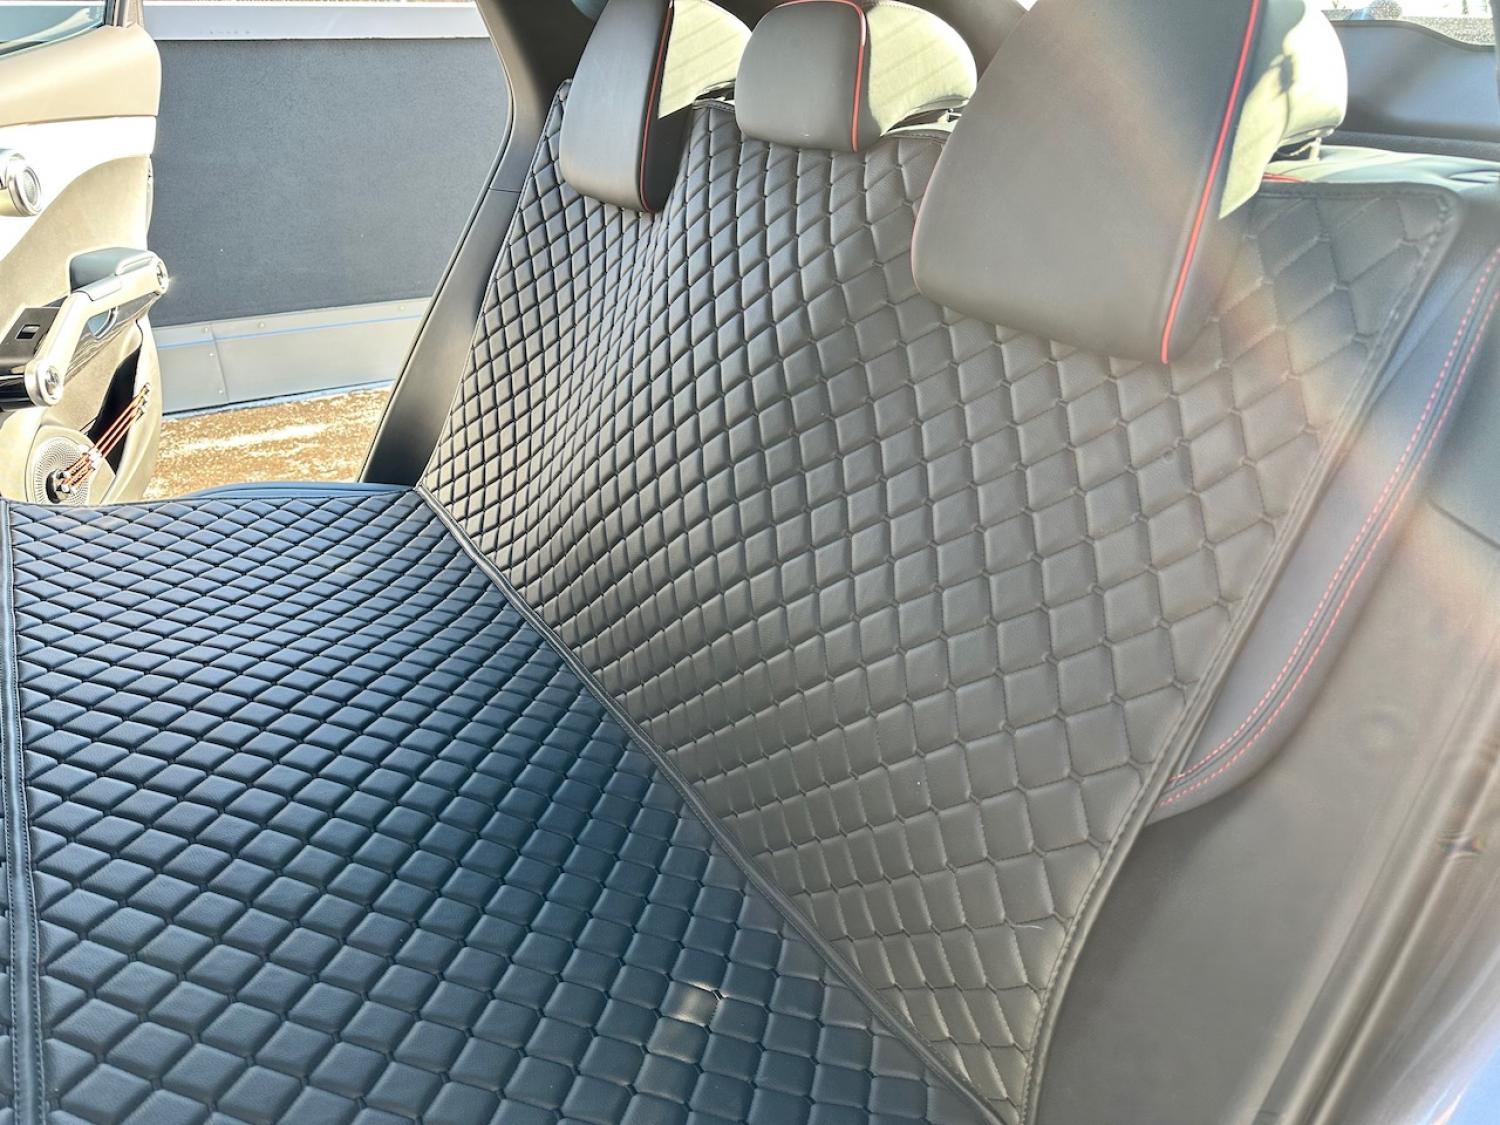 CARSTYLER® Back Seat Cover Geeignet Für Peugeot 5008